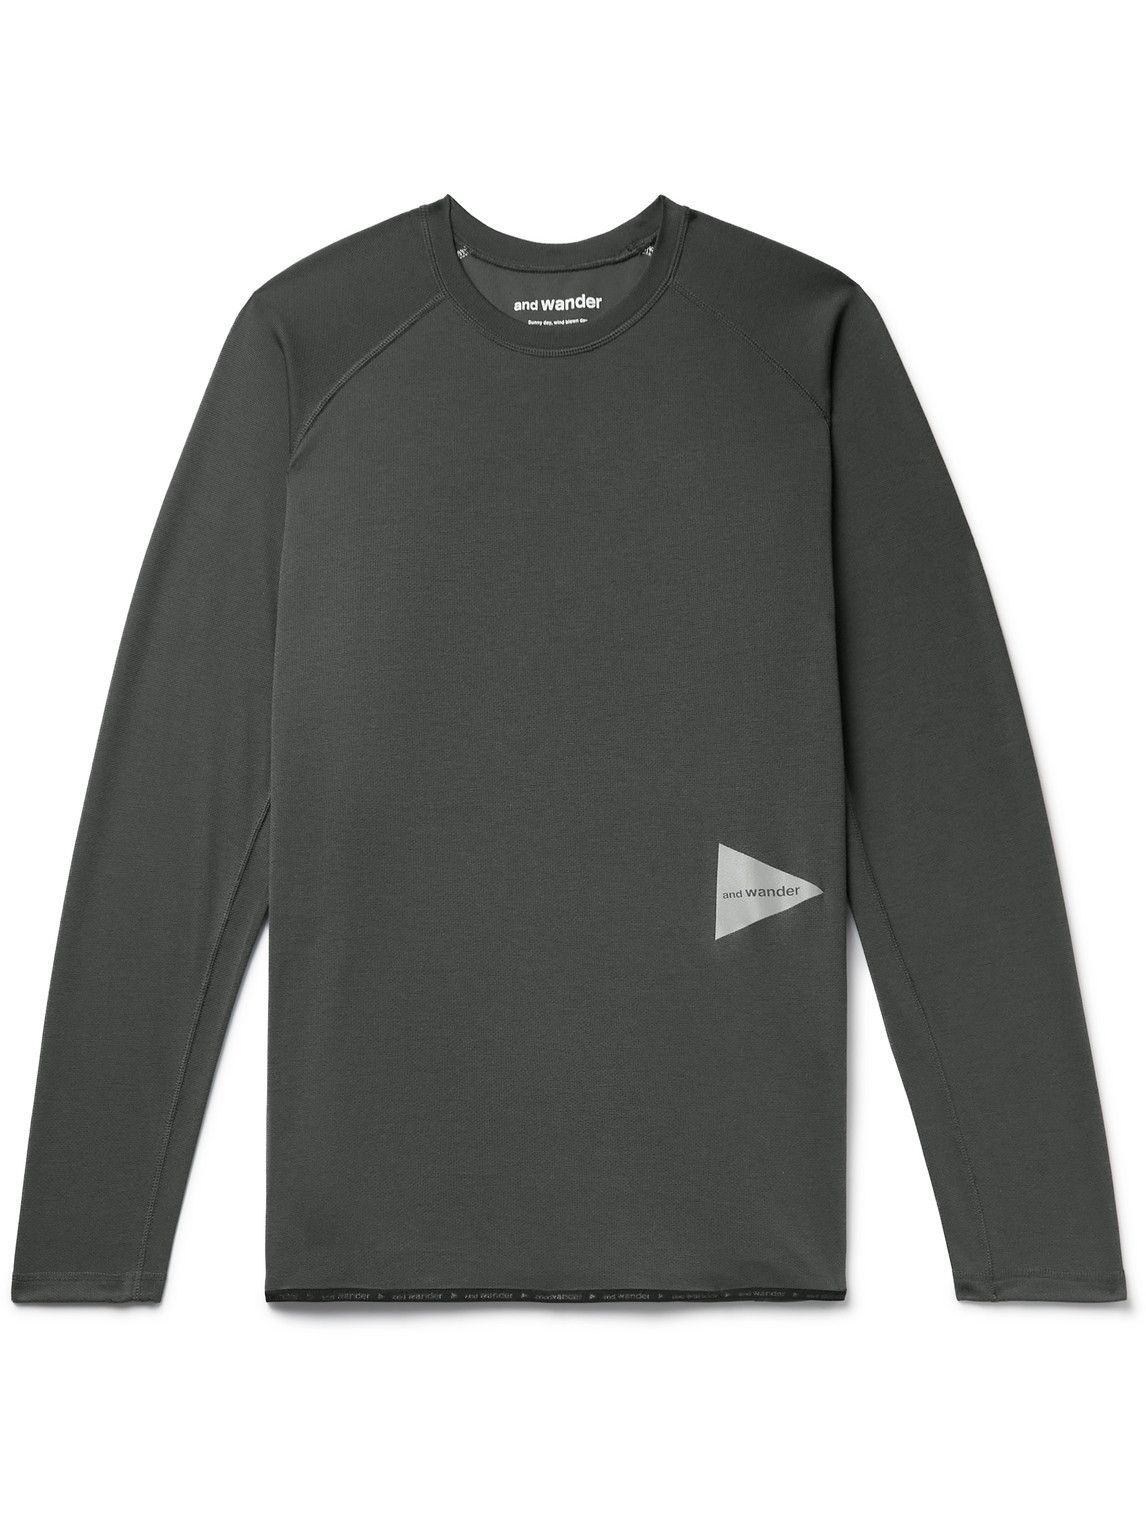 And Wander - Polartec Power Dry Base Layer - Gray and Wander